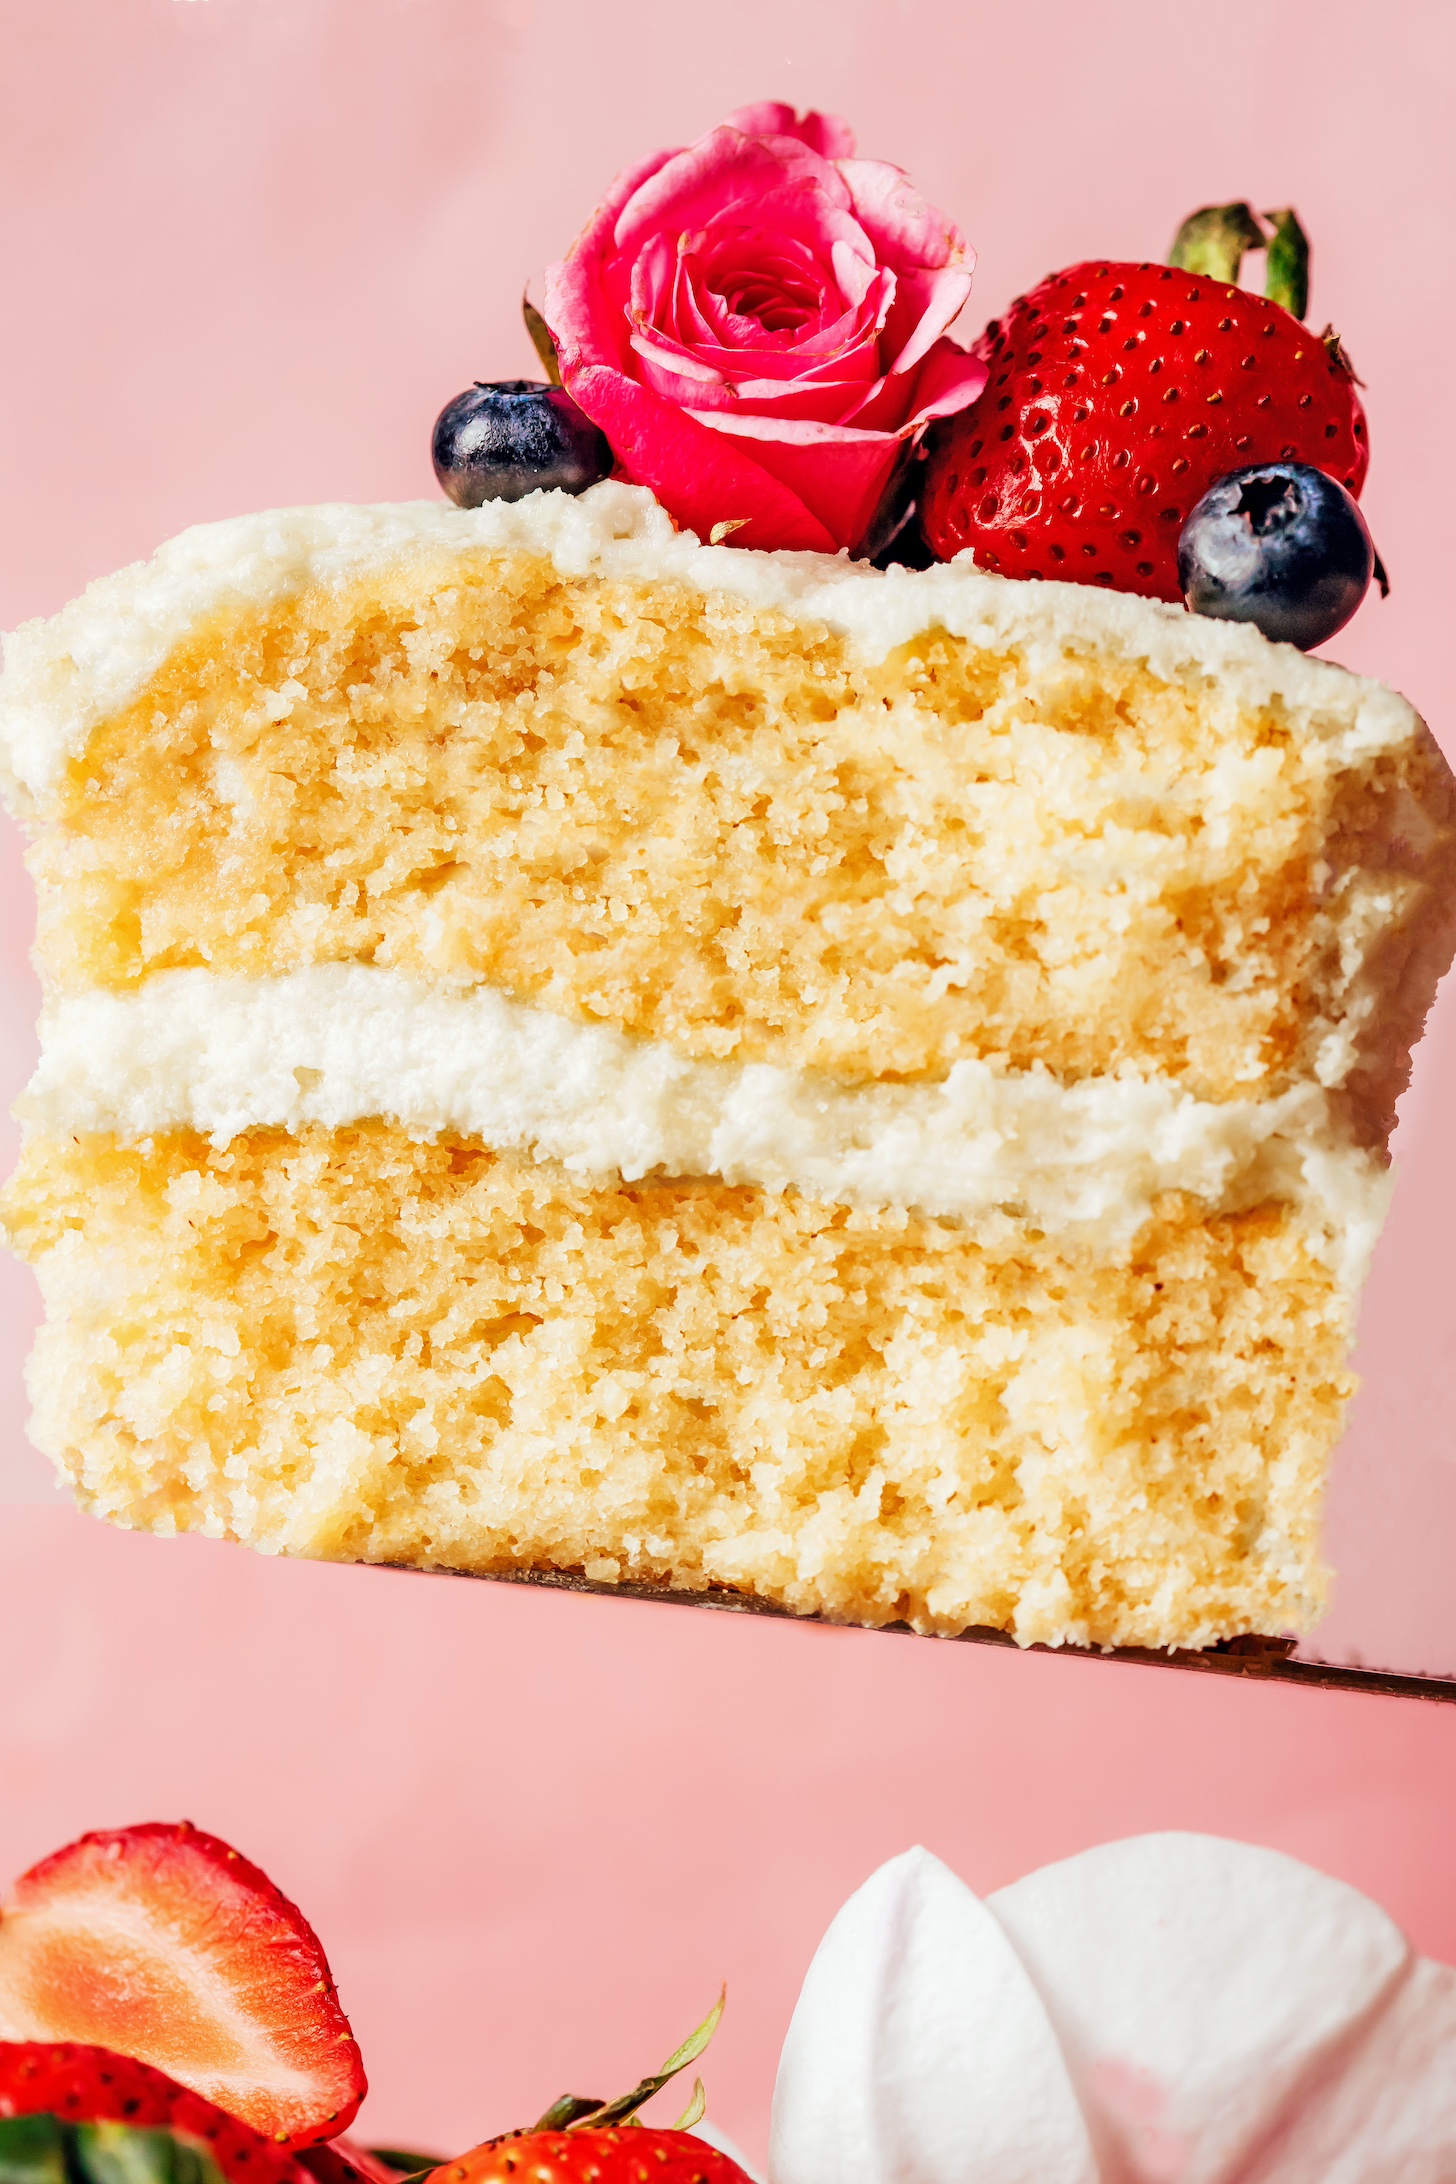 Close up shot of a slice of gluten-free vanilla cake to show the tender crumb texture